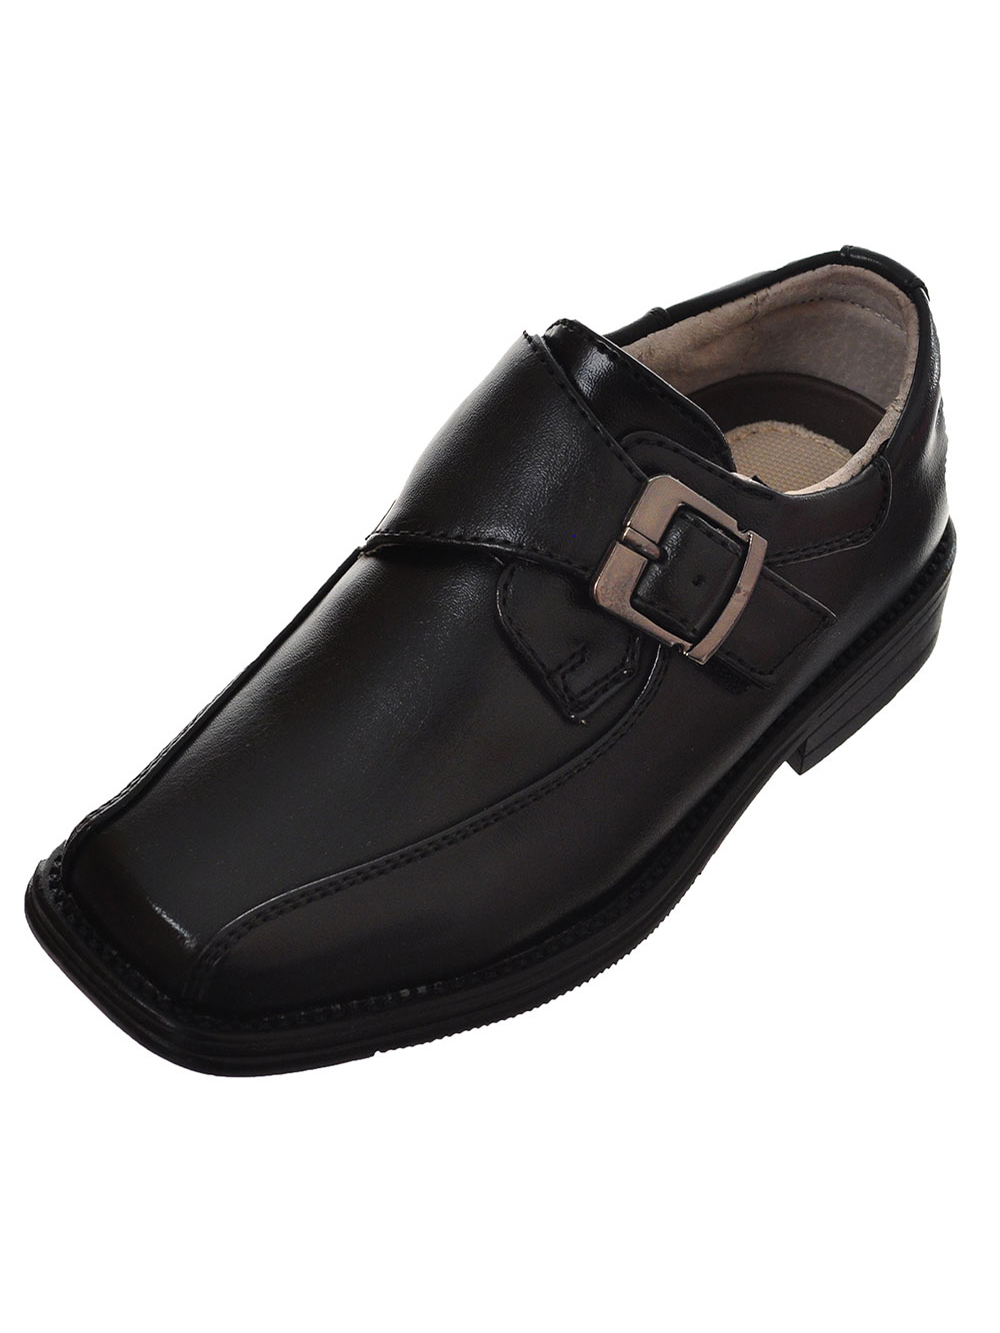 Boys' Single Strap Dress Shoes by Easy 